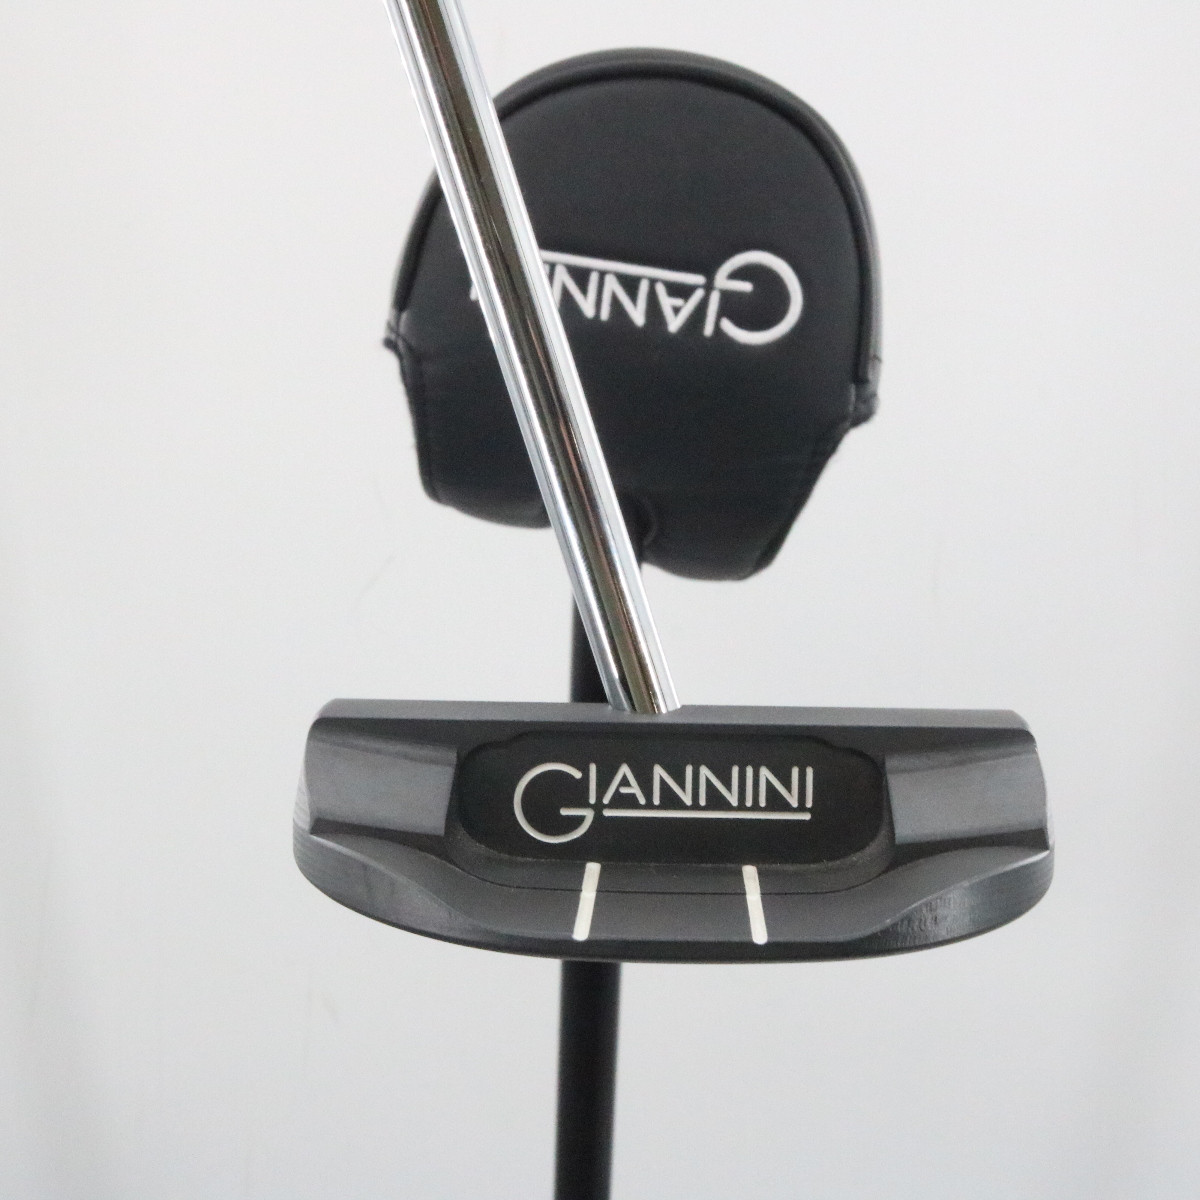 Kenny Giannini Legacy 2 Putter Center-Shafted Steel 35 Inches Headcover  62286A